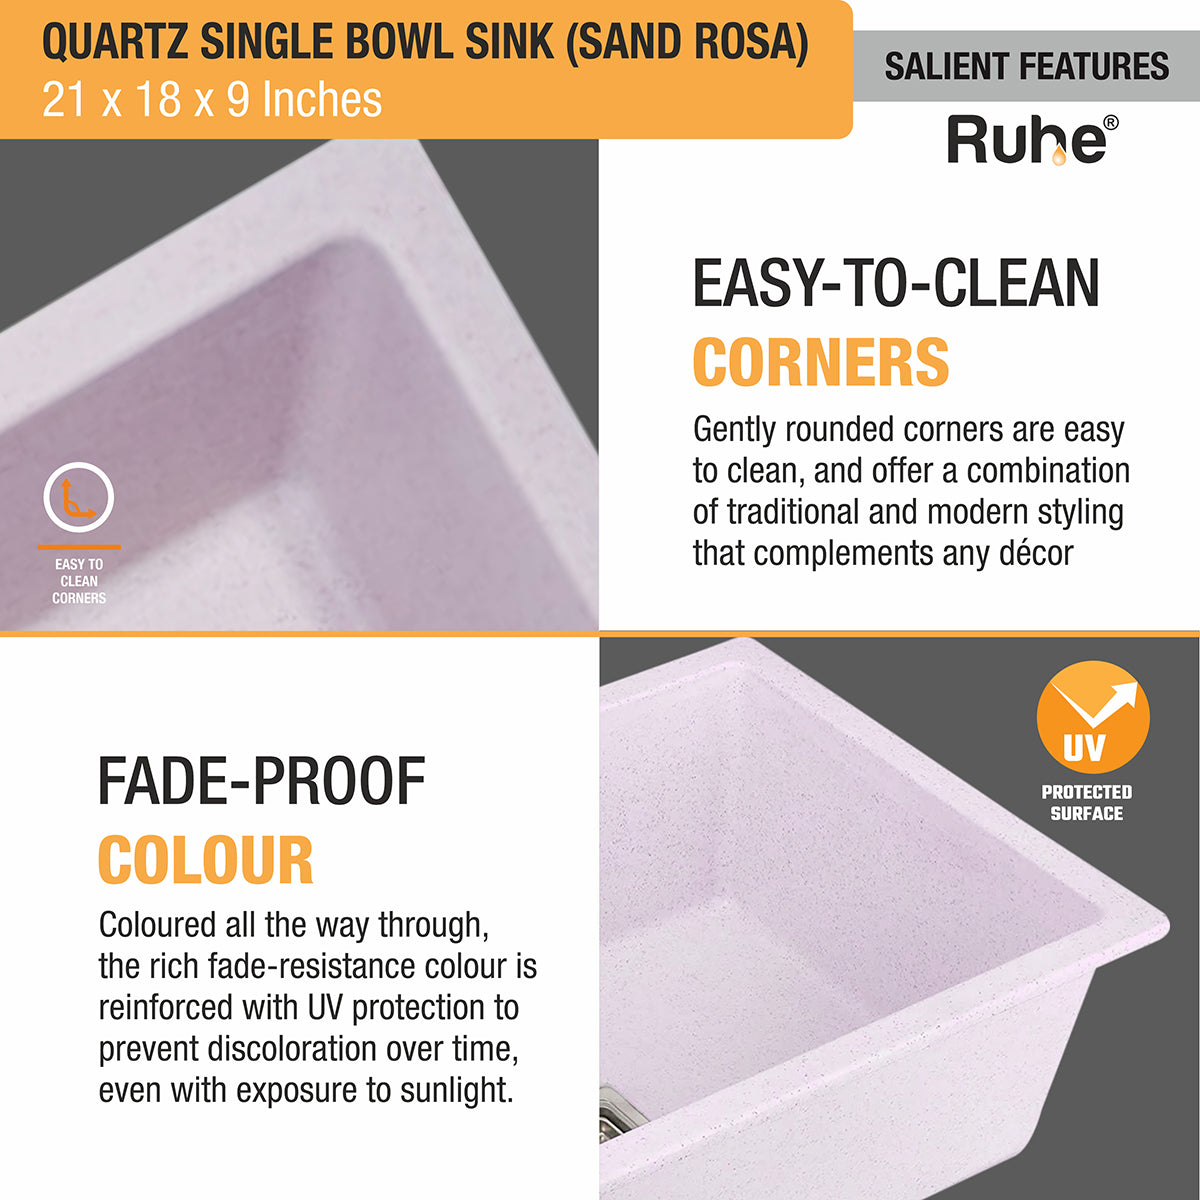 Quartz Sand Rosa Single Bowl Kitchen Sink (21 x 18 x 9 inches) easy to clean and pade proof